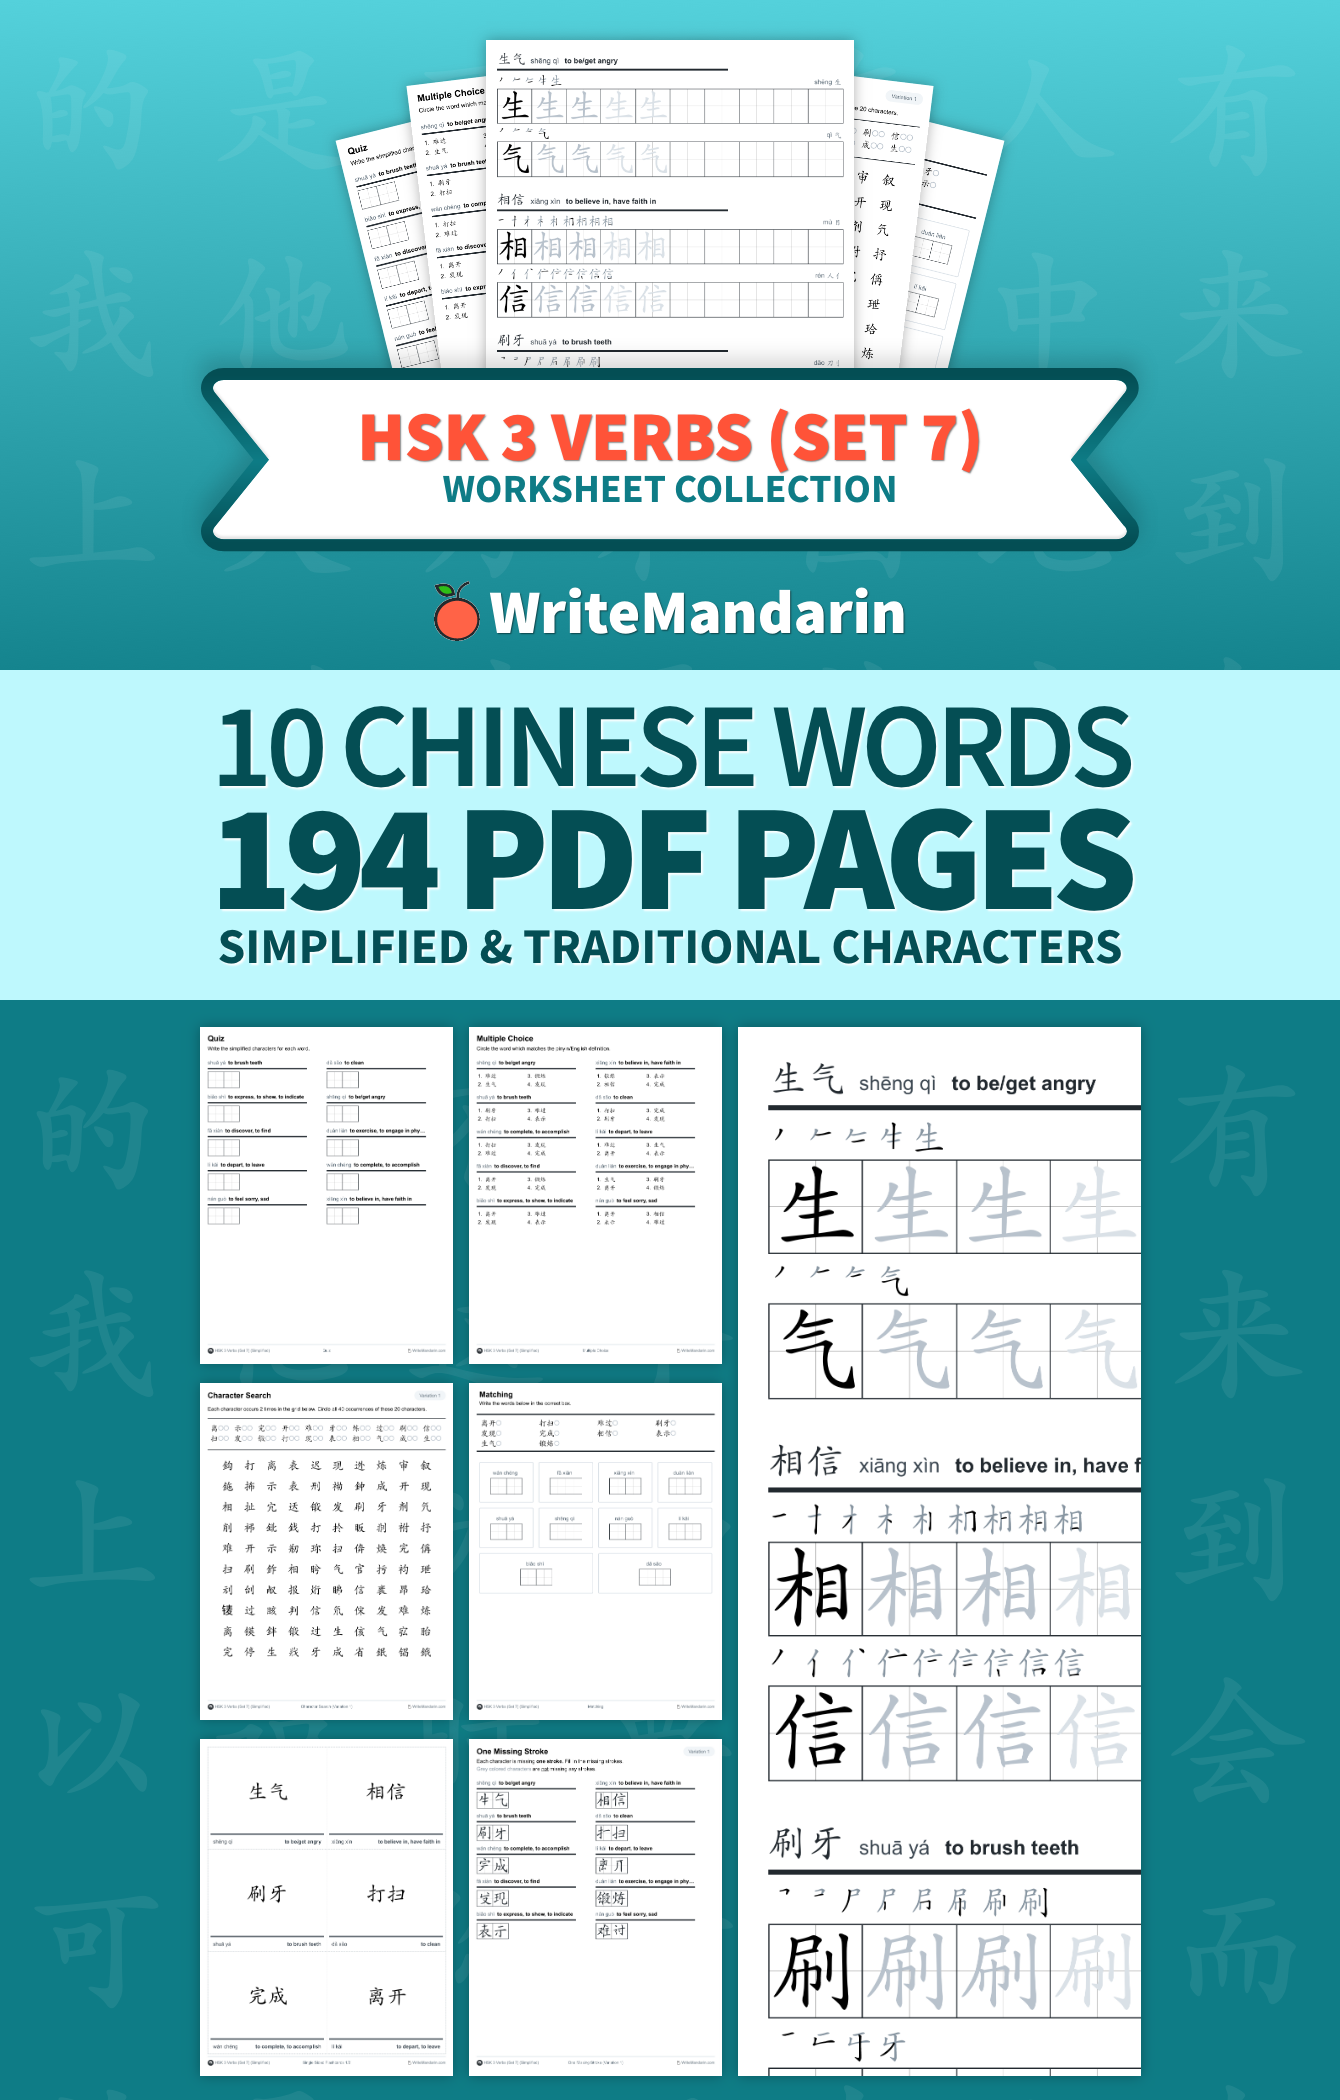 Preview image of HSK 3 Verbs (Set 7) worksheet collection